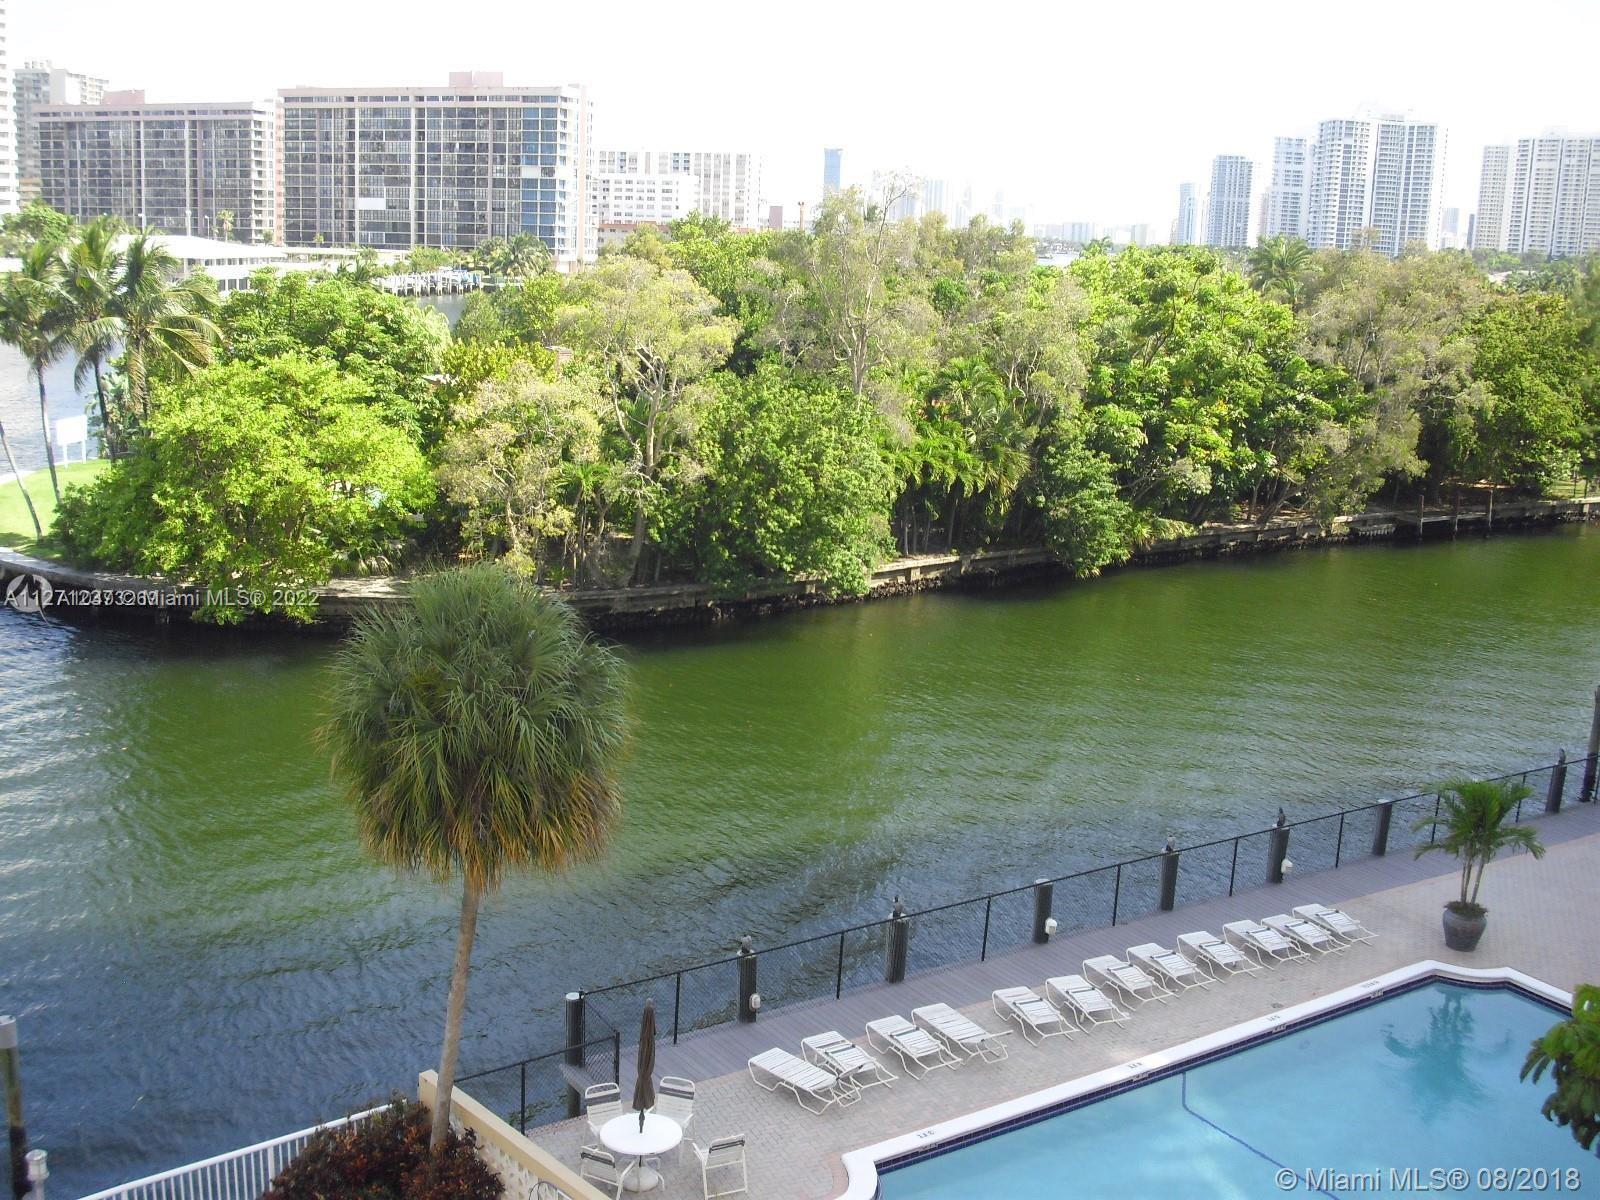 DORSEY ARMS CONDO Large 3 bedroom/2bath Corner unit with balcony overlooking the pool & Intracoastal